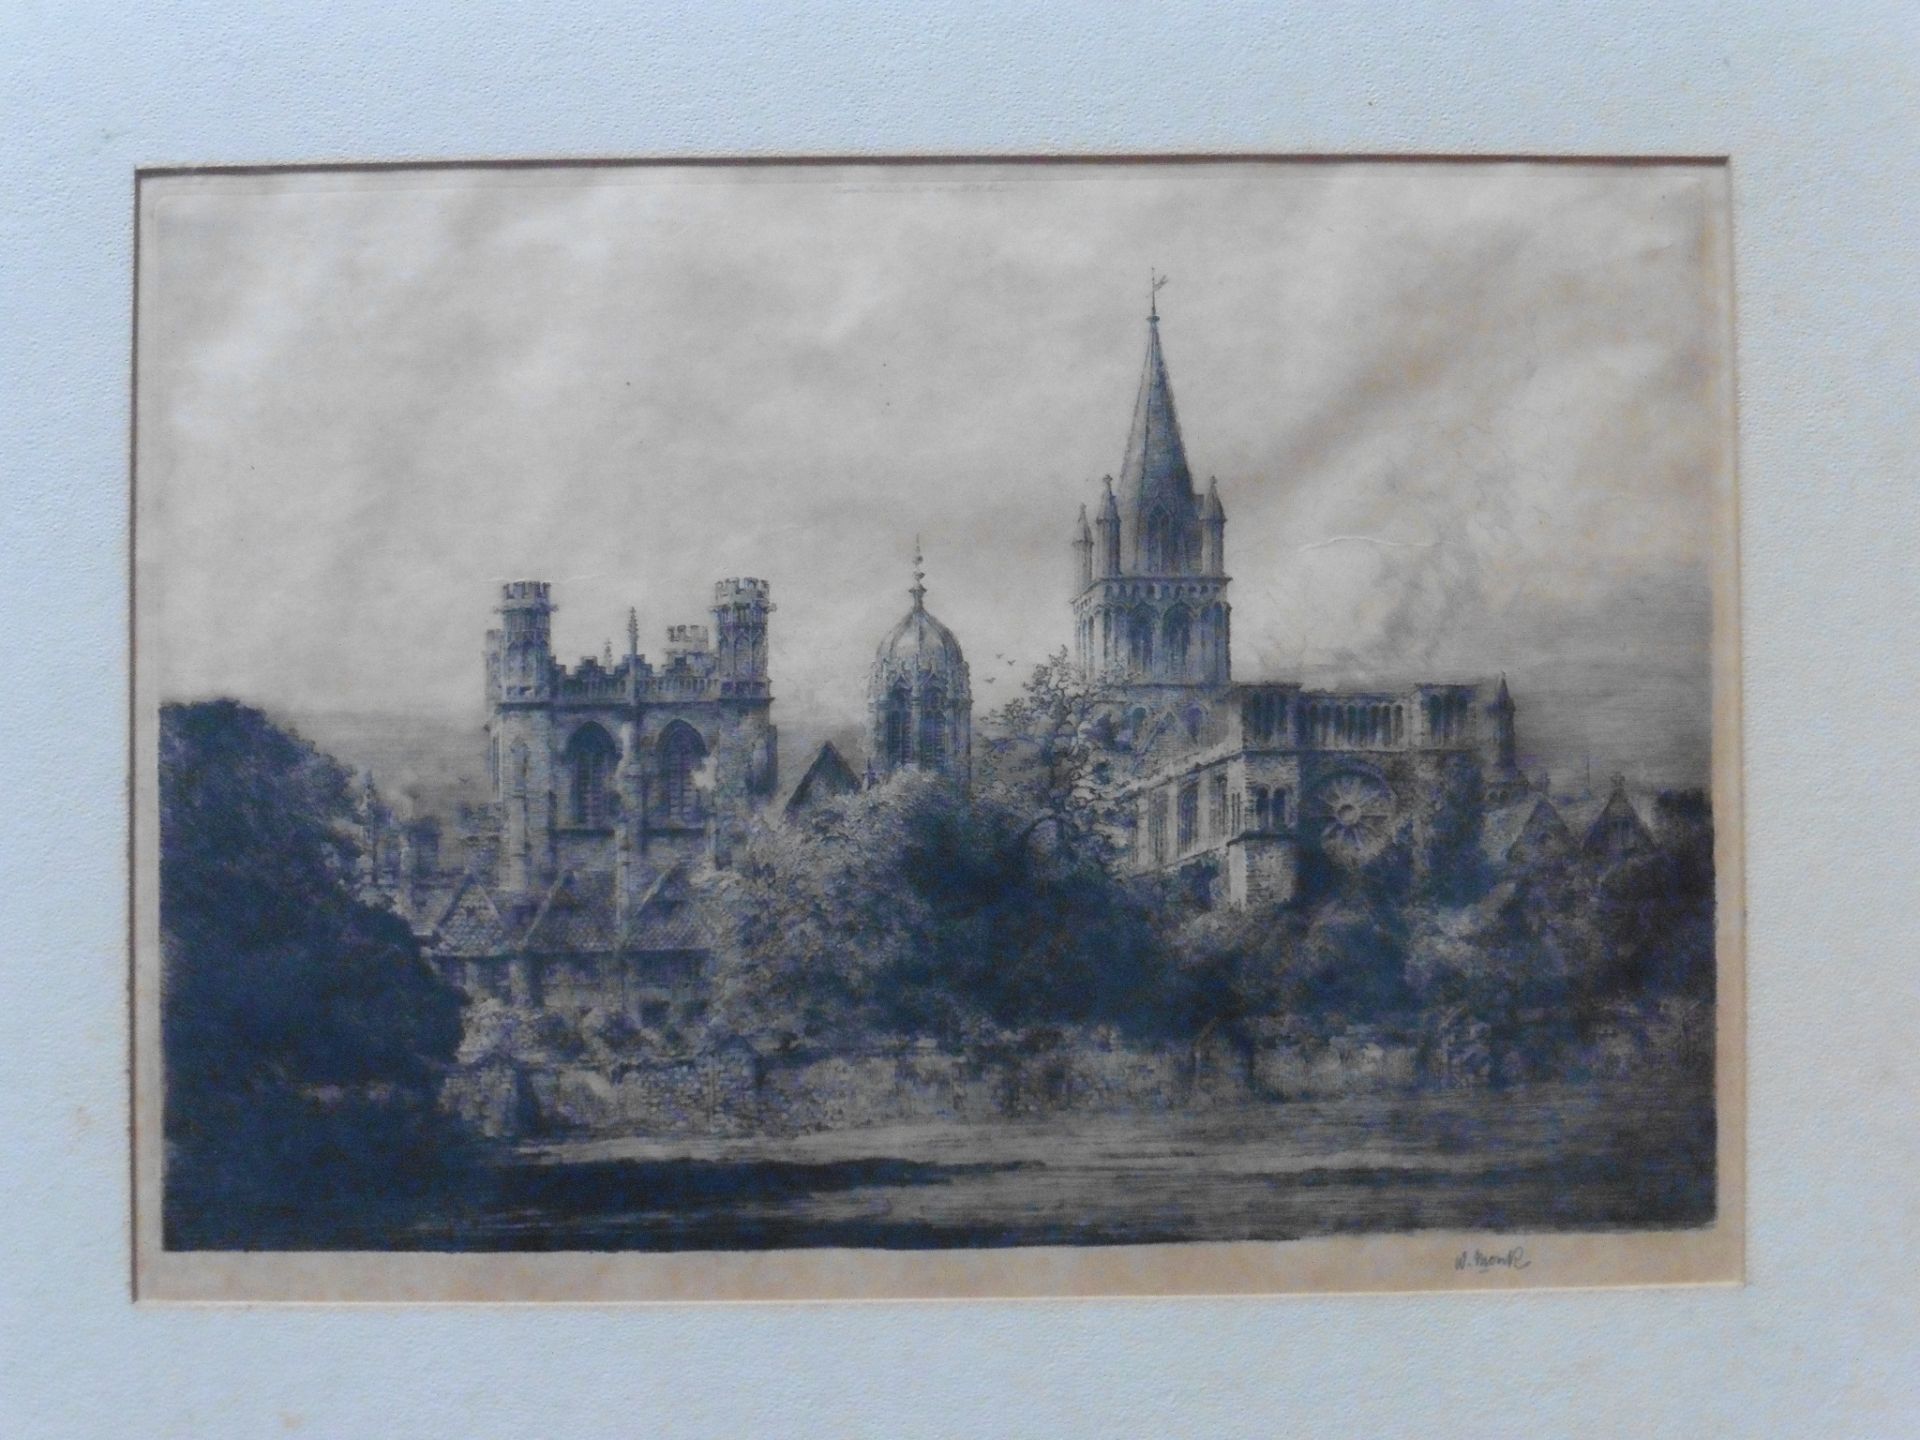 William Monk (1863 - 1937 “ College ?” signed etching